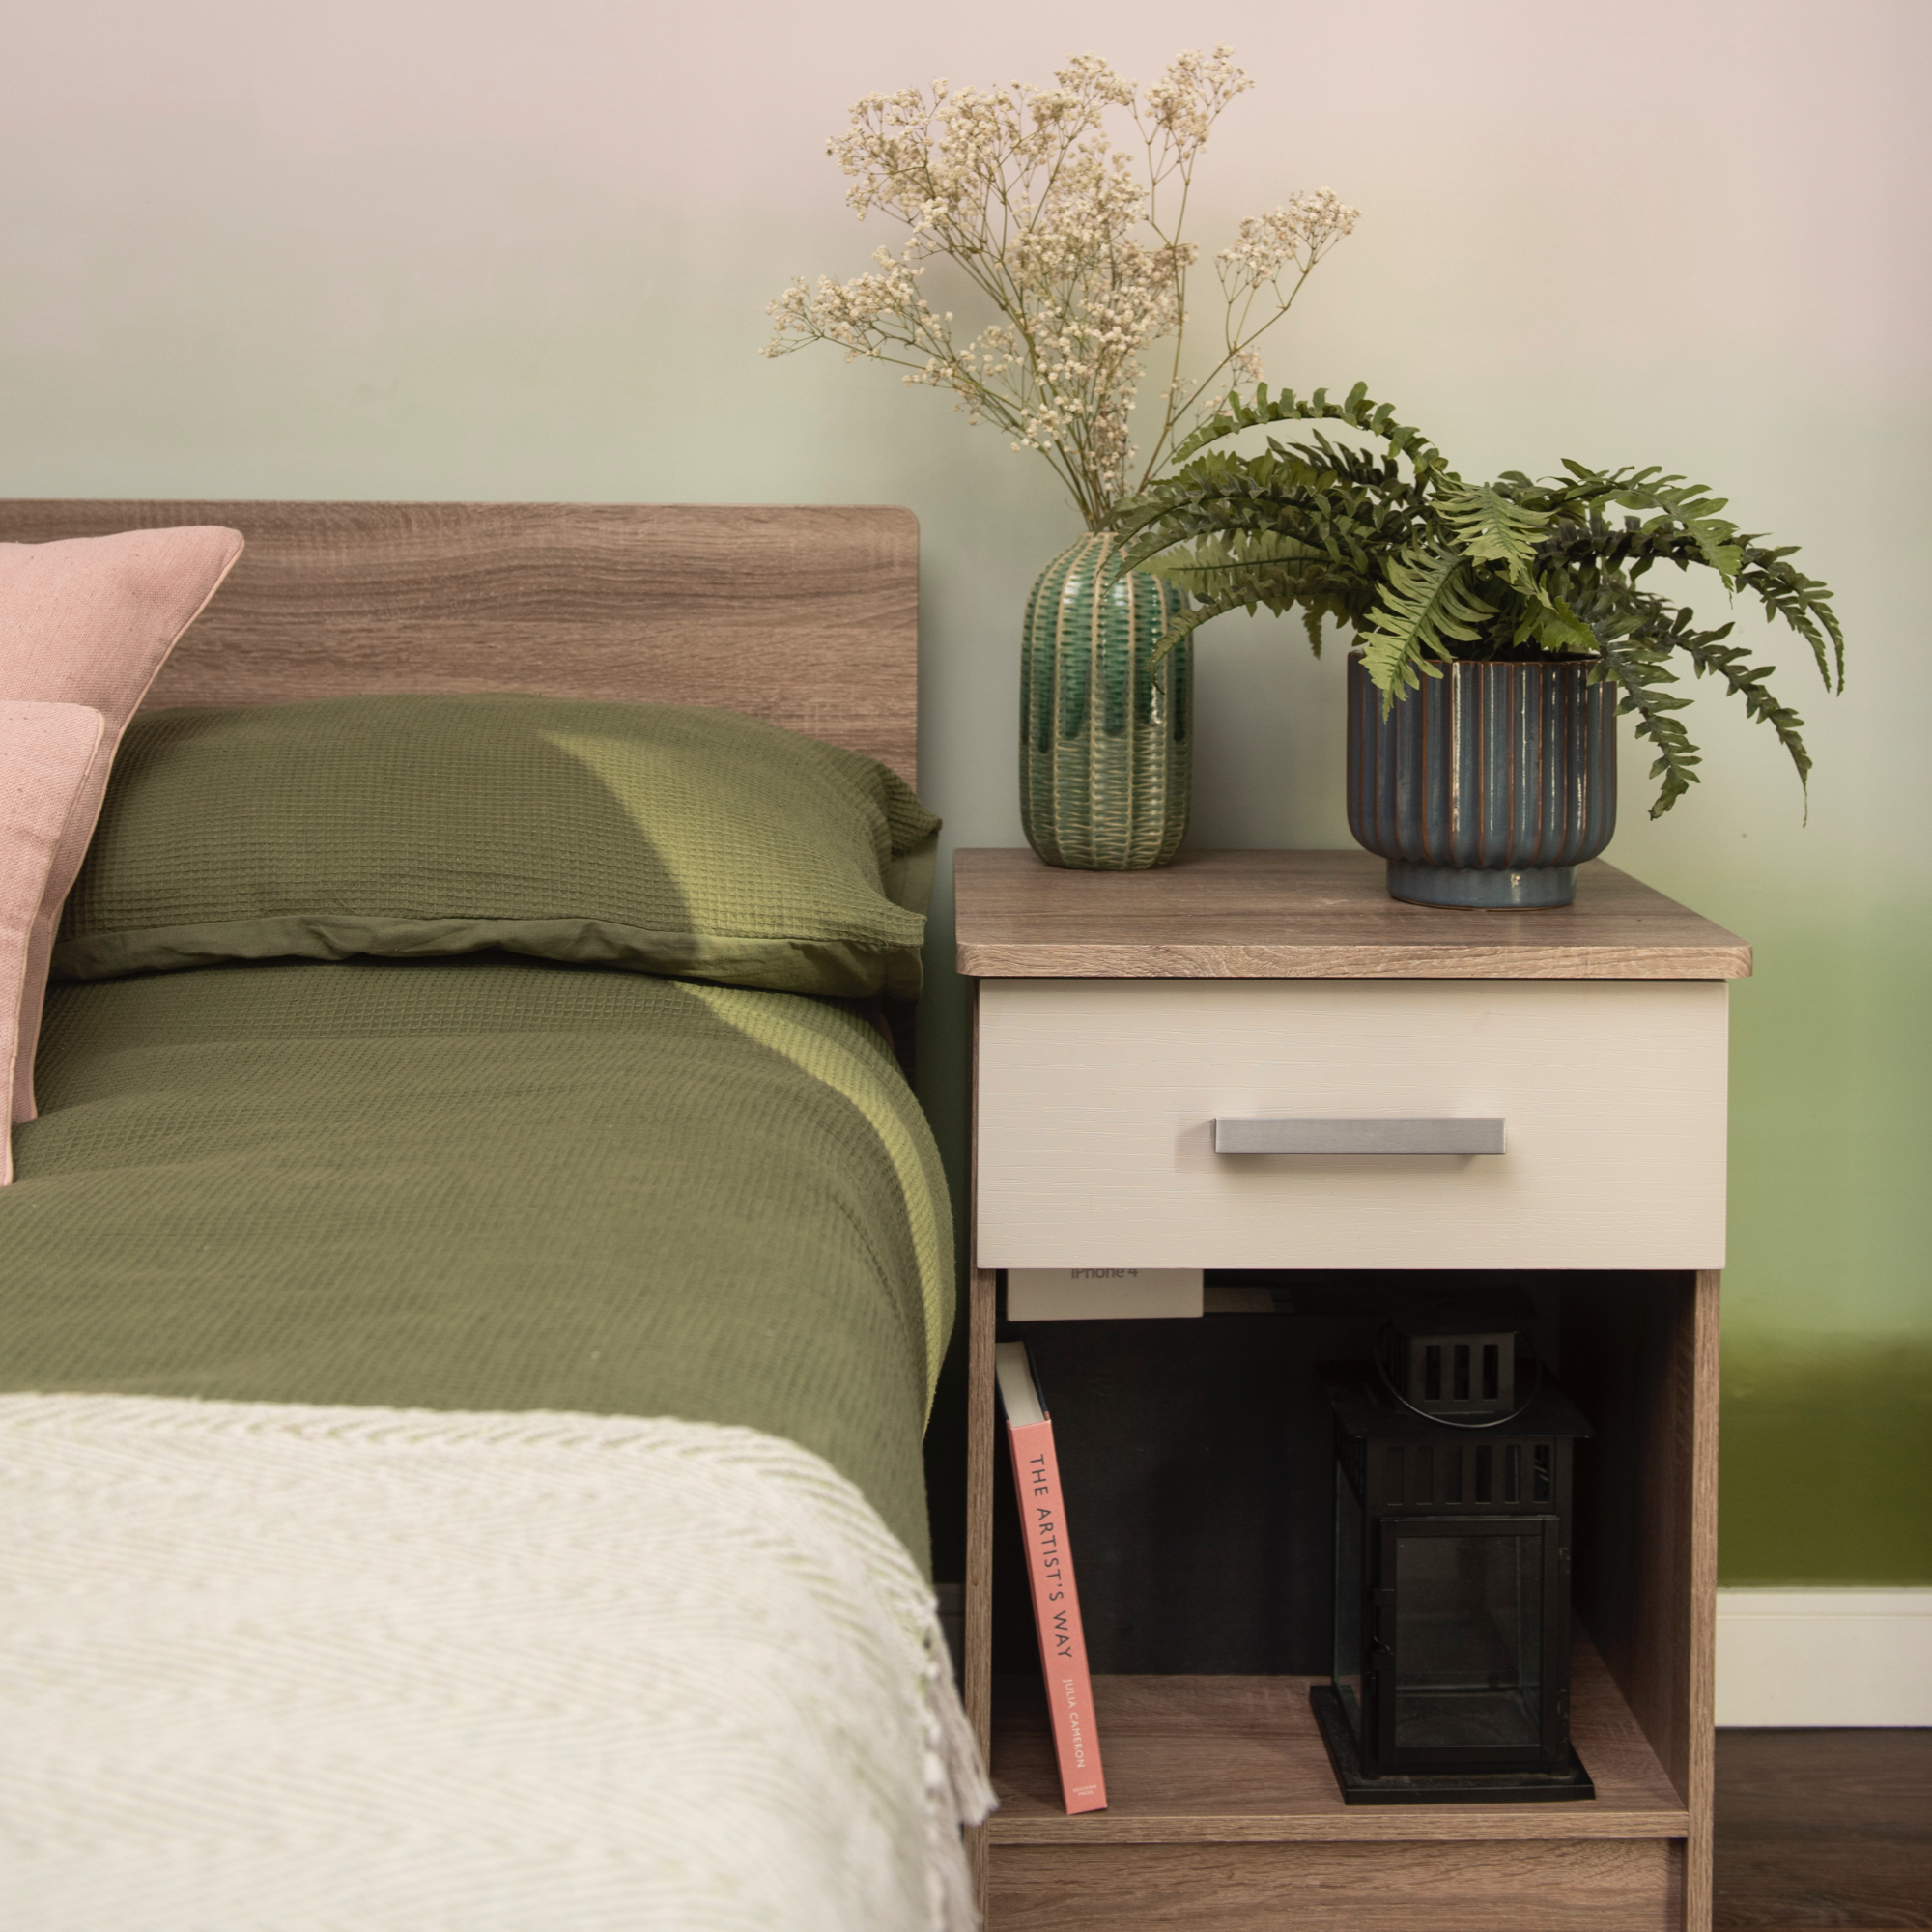 green bedding with wooden bed and bedside table